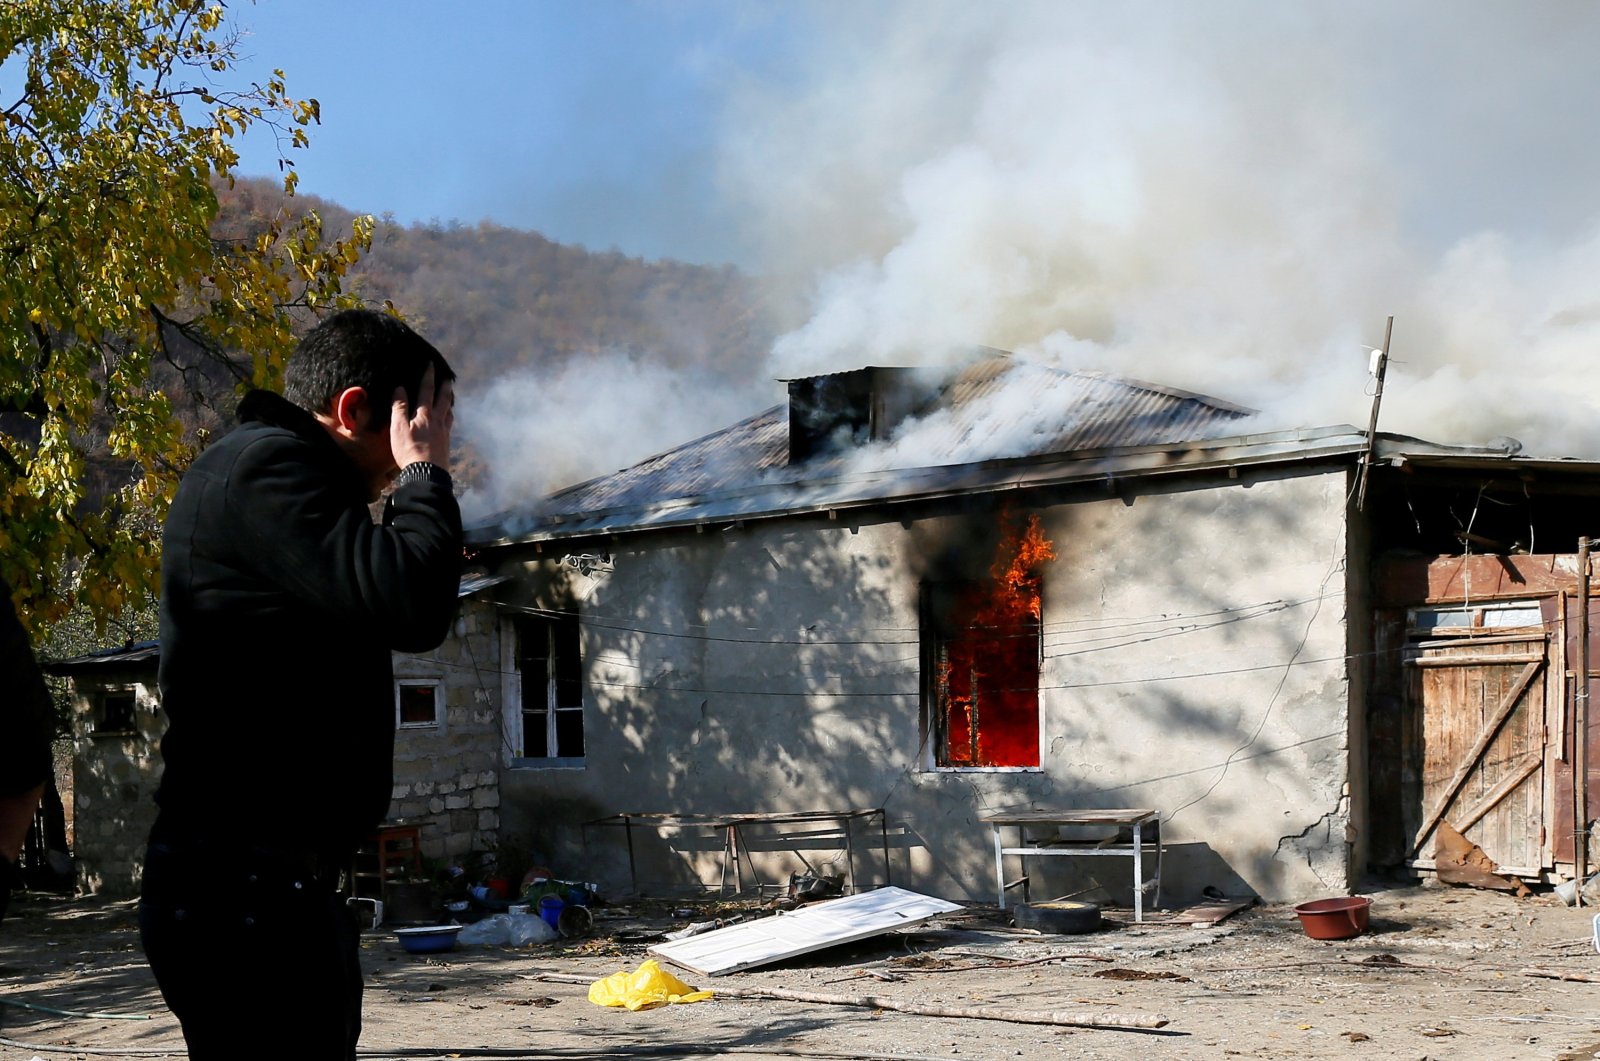 A man reacts as he stands near a house set on fire by departing ethnic Armenians, in an area that had been held under Armenian military control, in the village of Cherektar in the region of Nagorno-Karabakh, Azerbaijan, Nov. 14, 2020. (Reuters Photo)